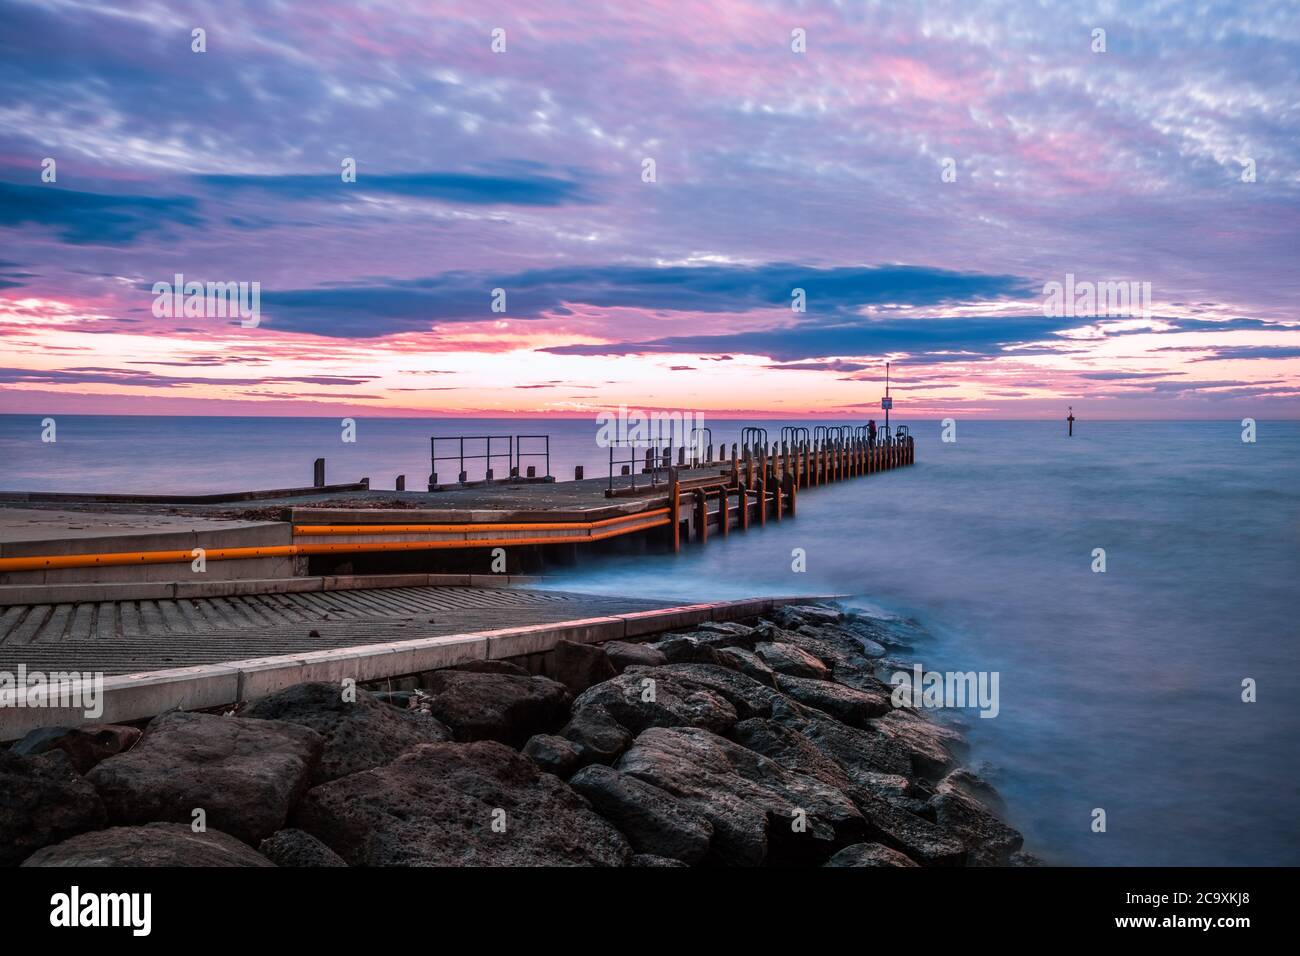 Scenic sunset over ocean and boat jetty - long exposure landscape Stock Photo